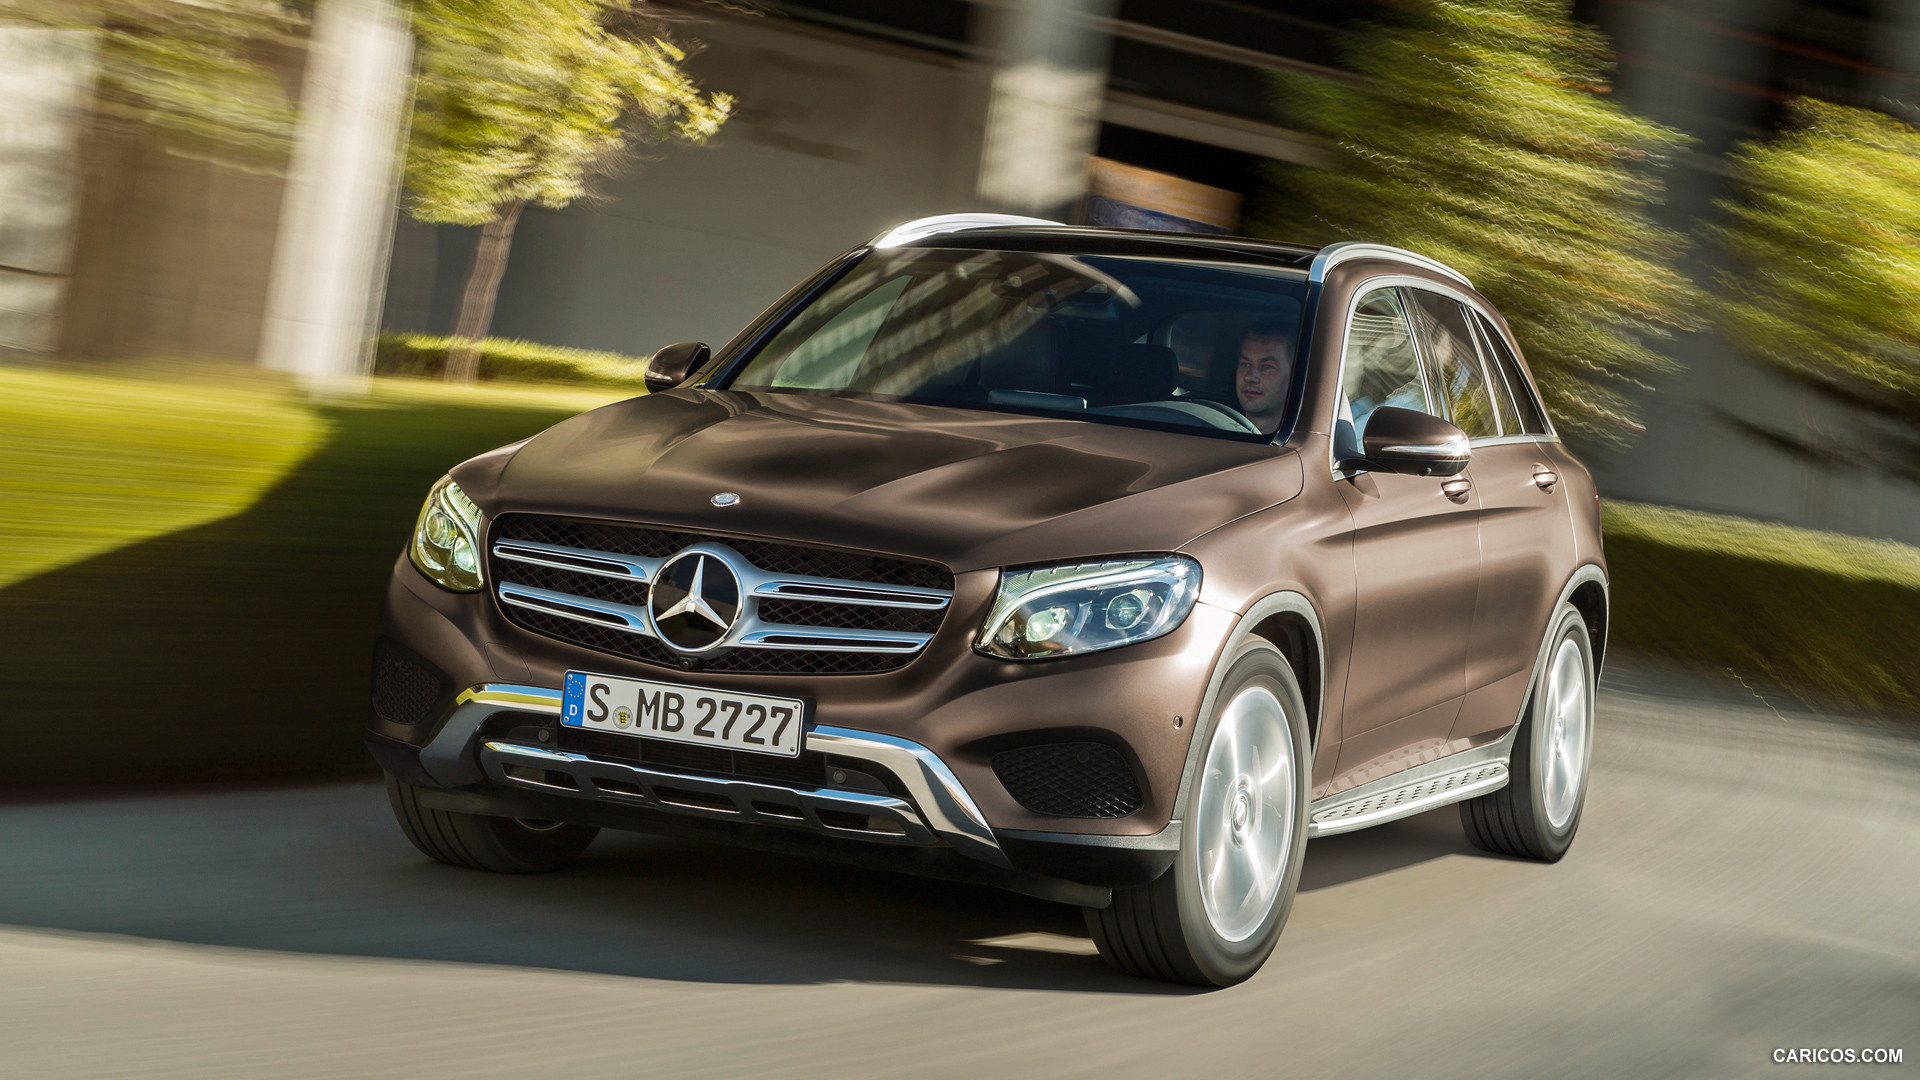 2016 Mercedes-Benz GLC-Class GLC 250d 4MATIC (Citrine Brown Magno, Offroad Line) - Front, #18 of 254